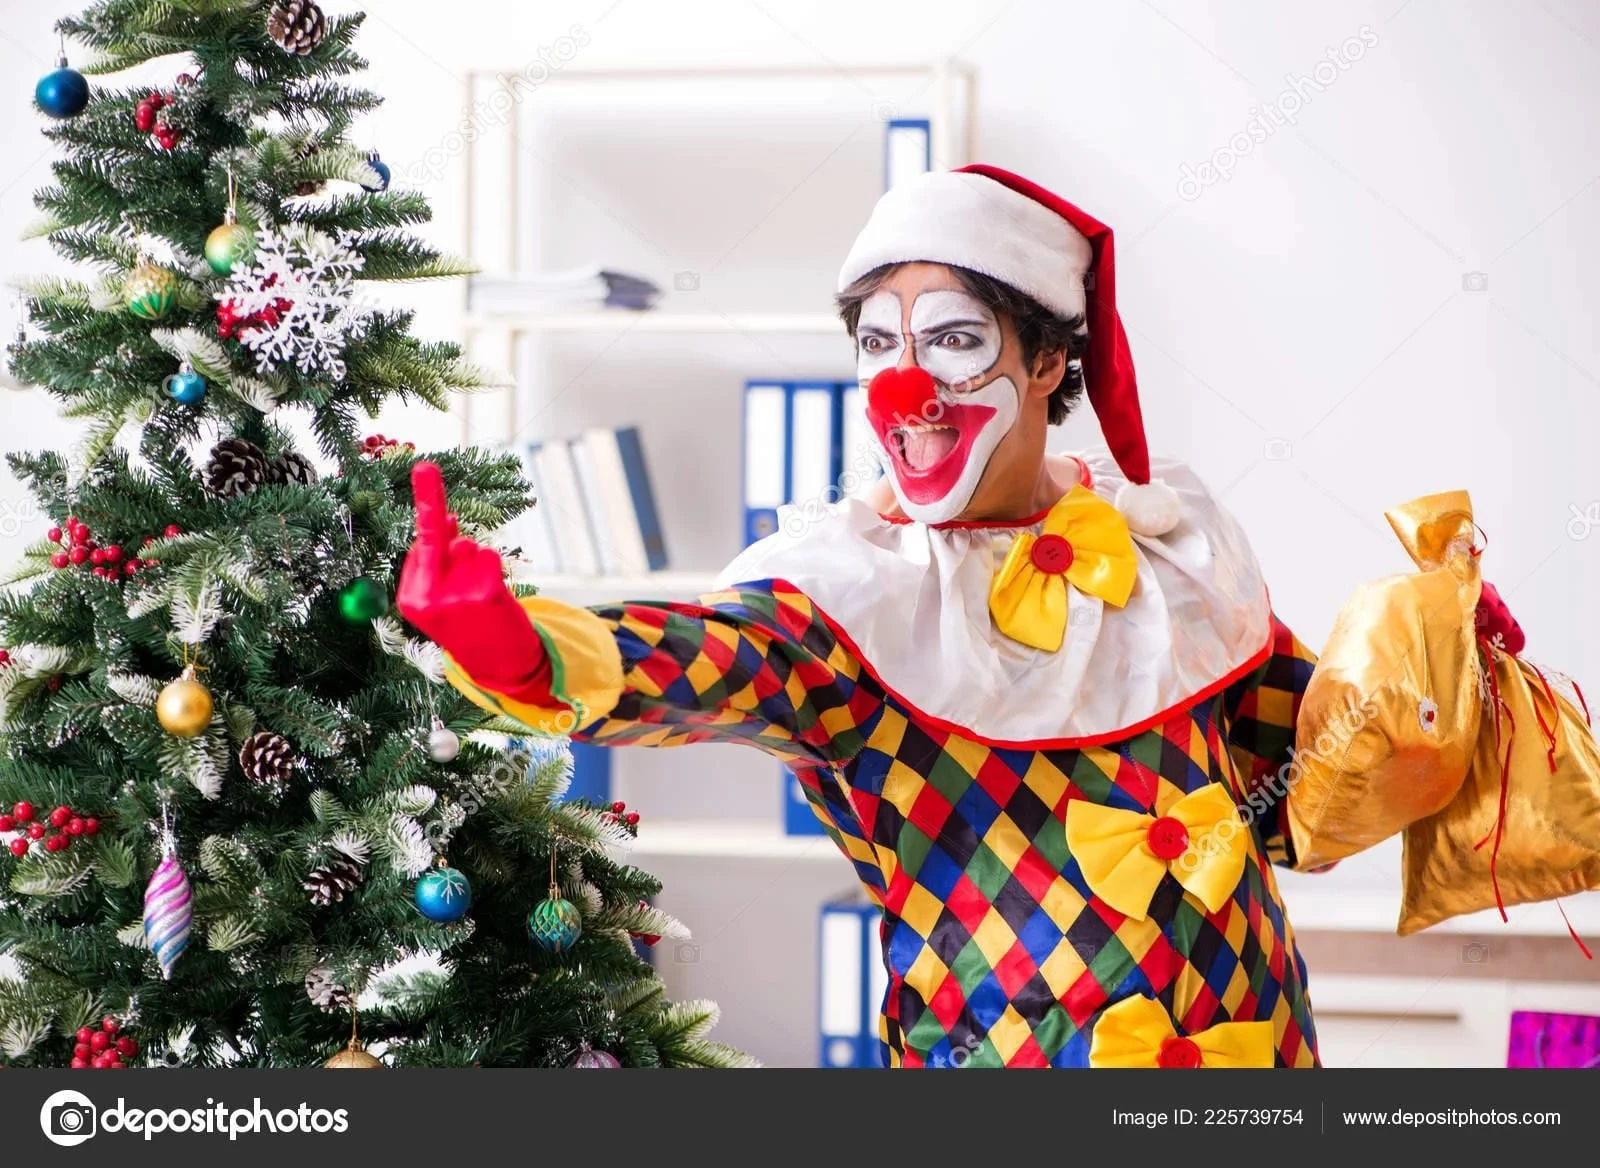 When You Won The Lottery While Working As A Clown